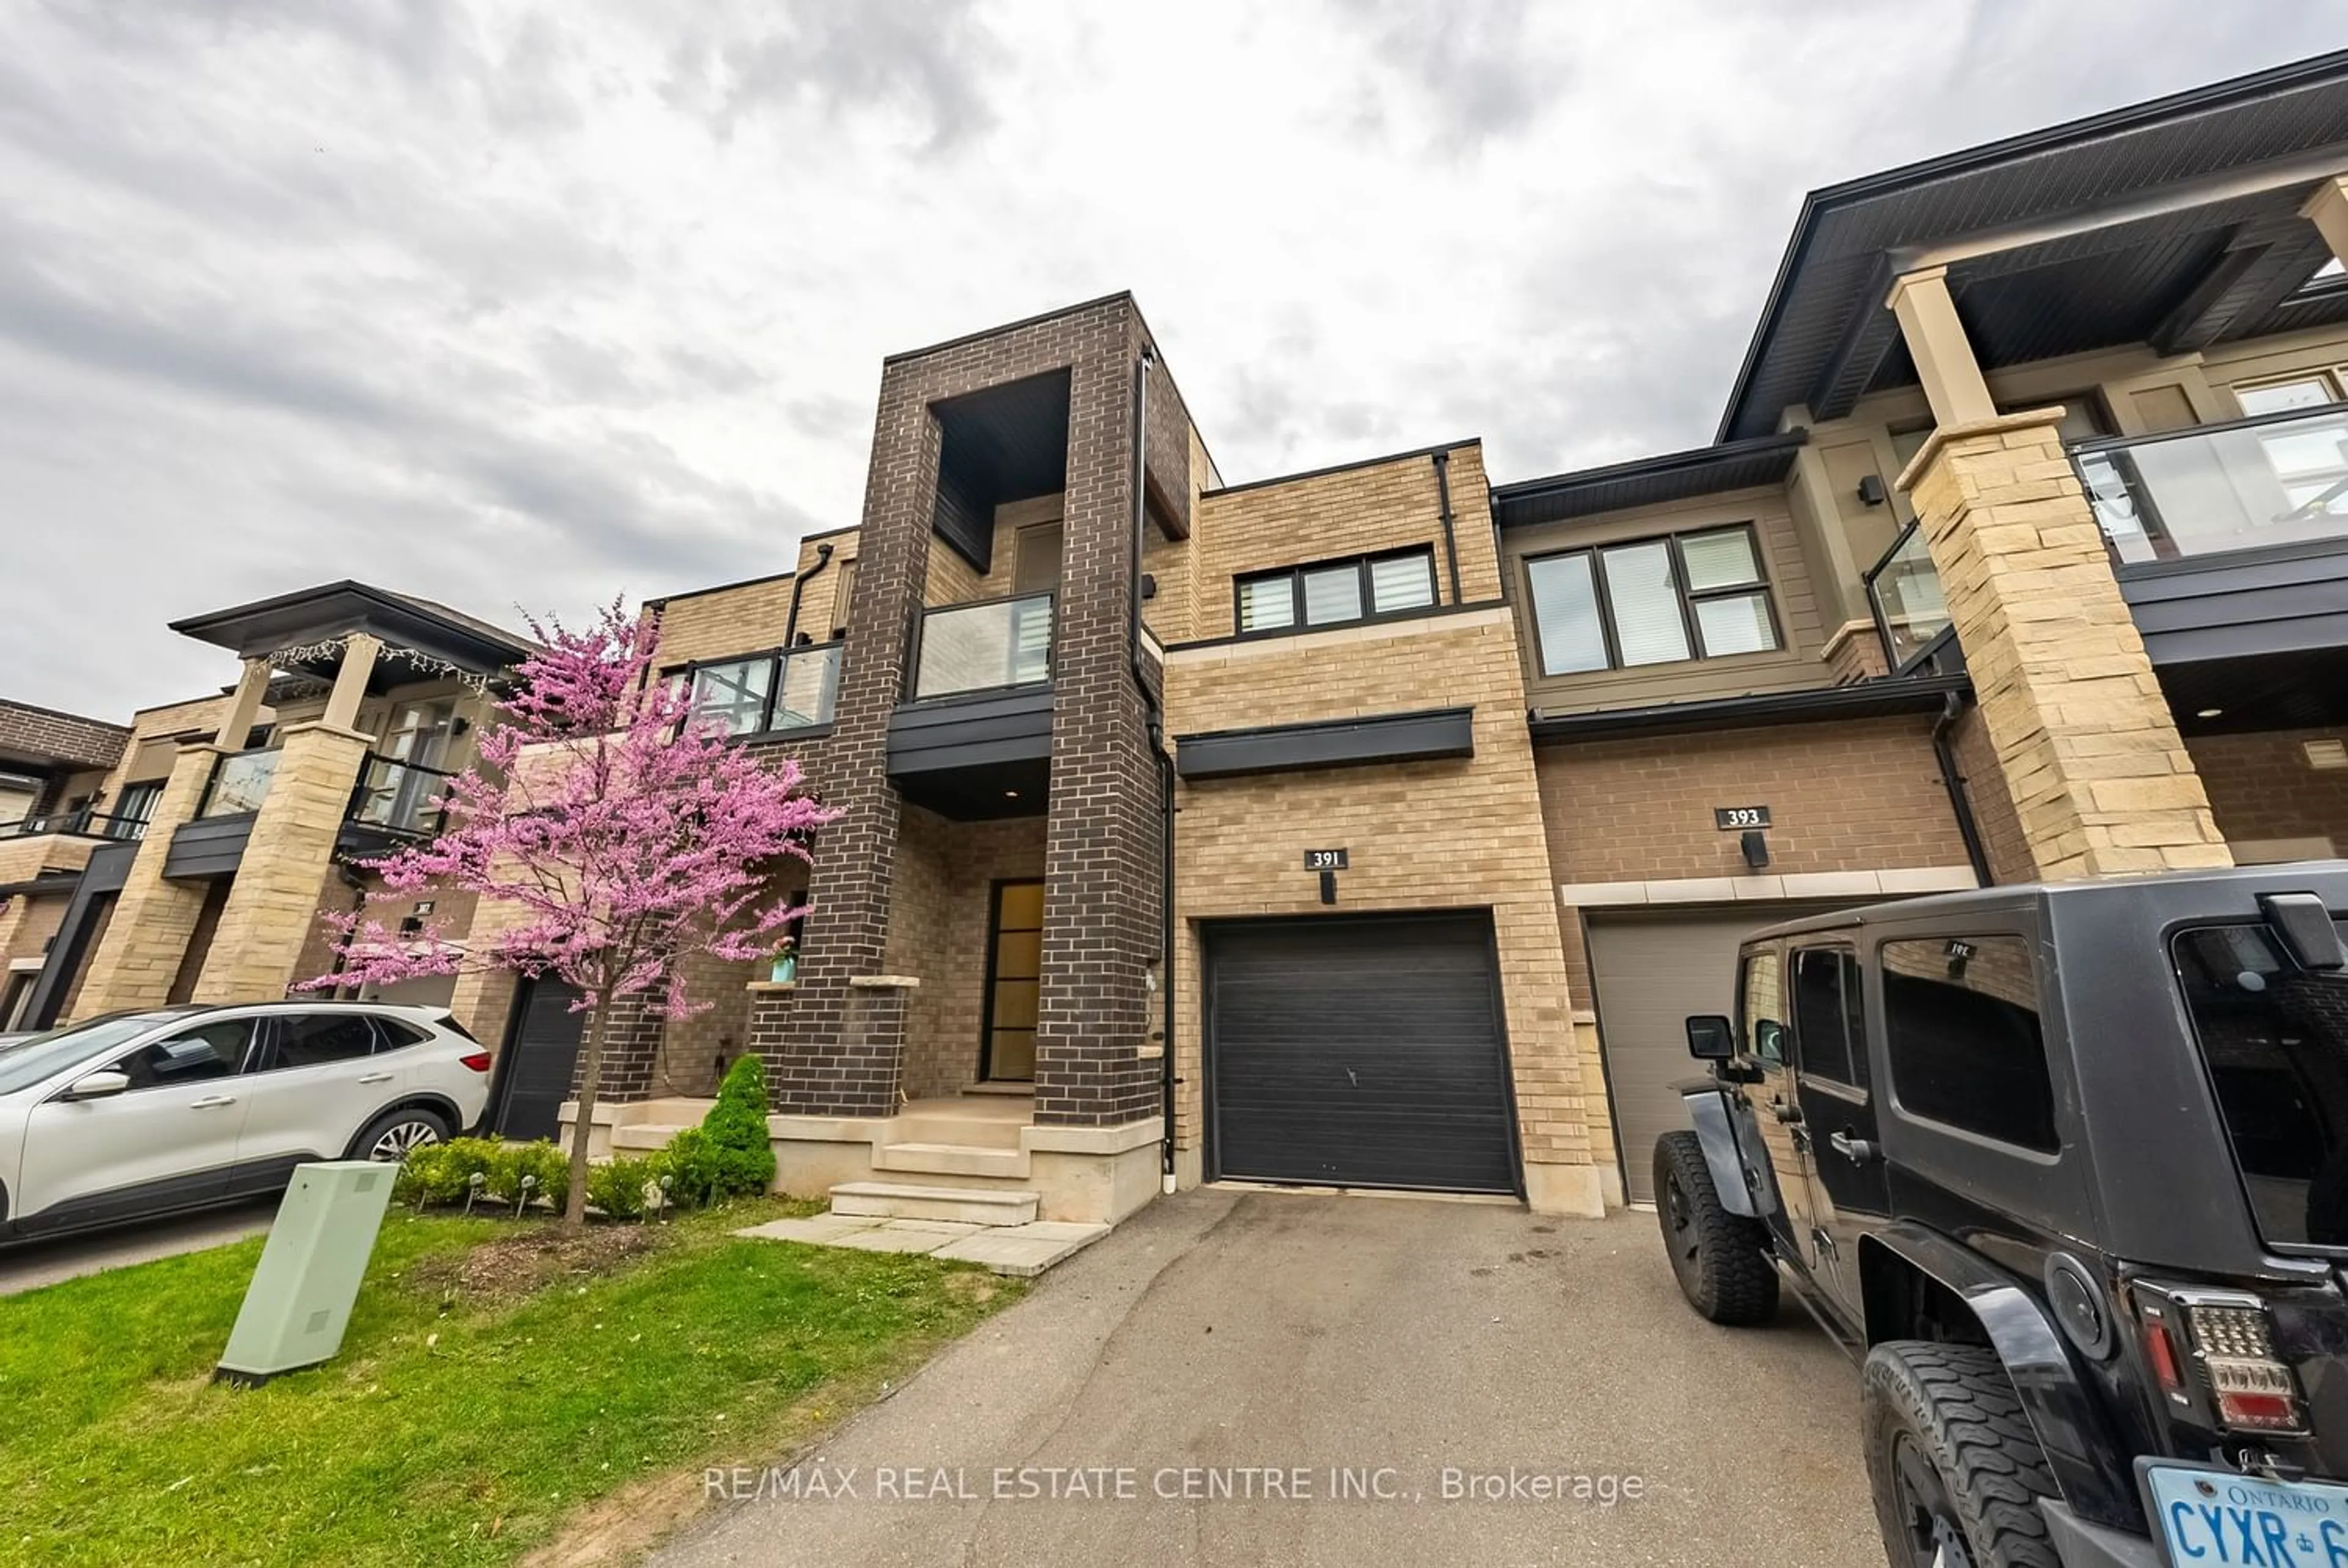 A pic from exterior of the house or condo for 391 Athabasca Common, Oakville Ontario L6H 0R5